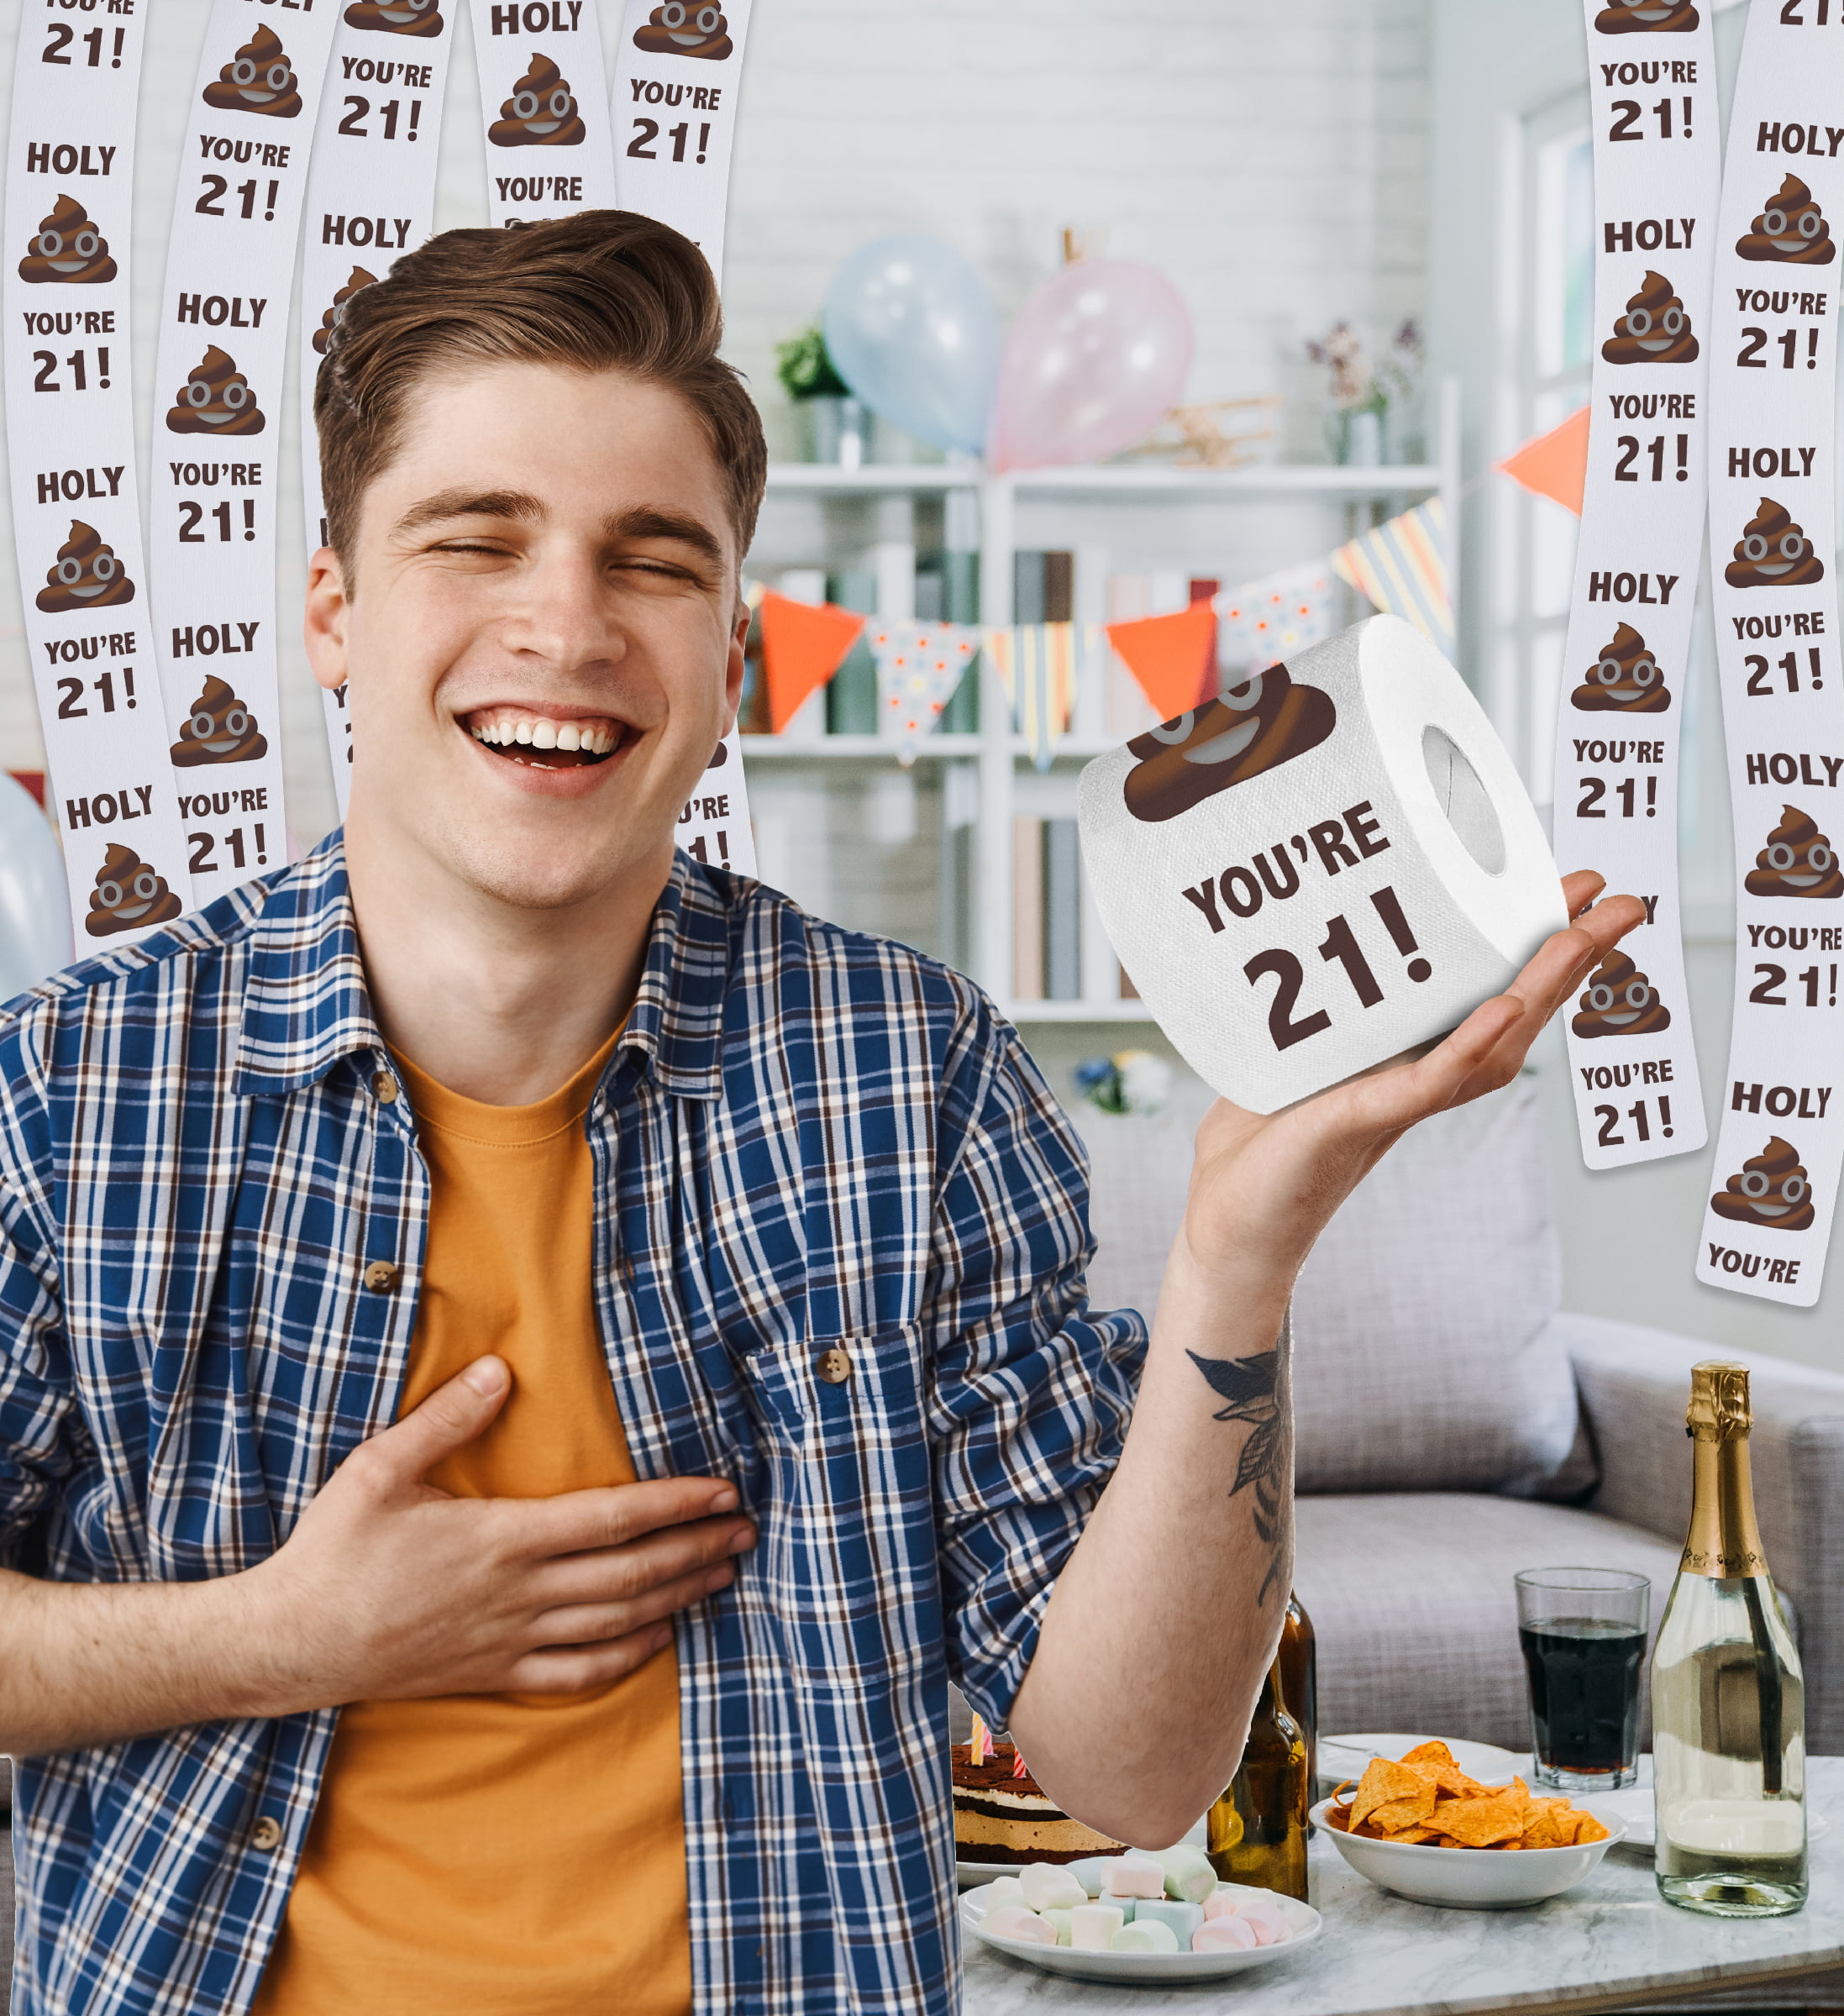 21+ Gag Gifts Guaranteed To Make The Party More Fun — Funny Gifts